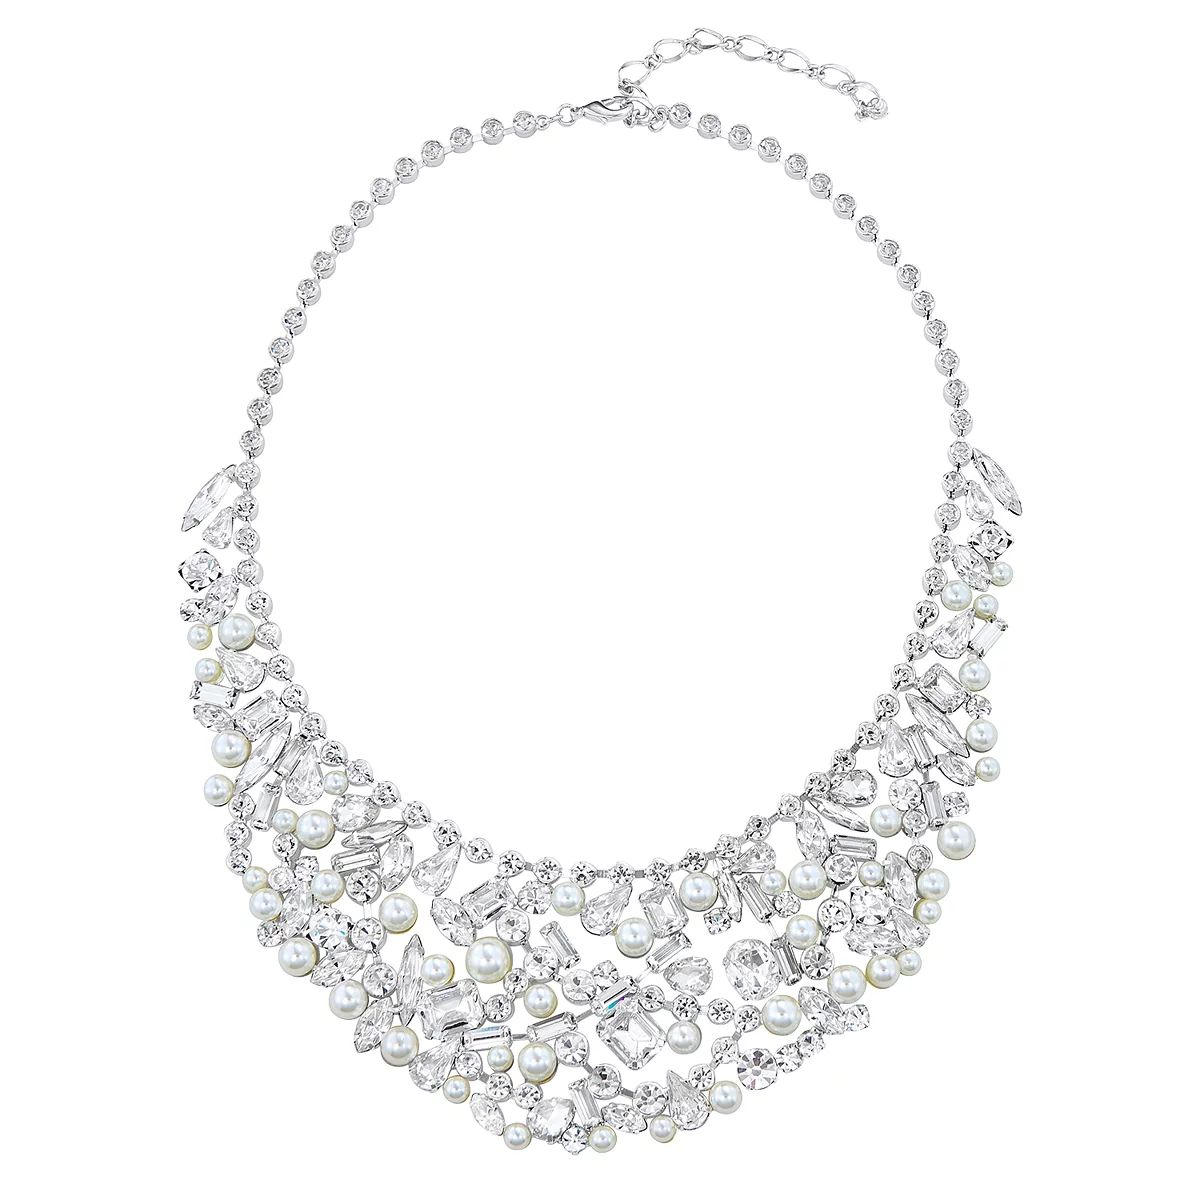 Simulated Crystal Bib Statement Necklace | Kohl's